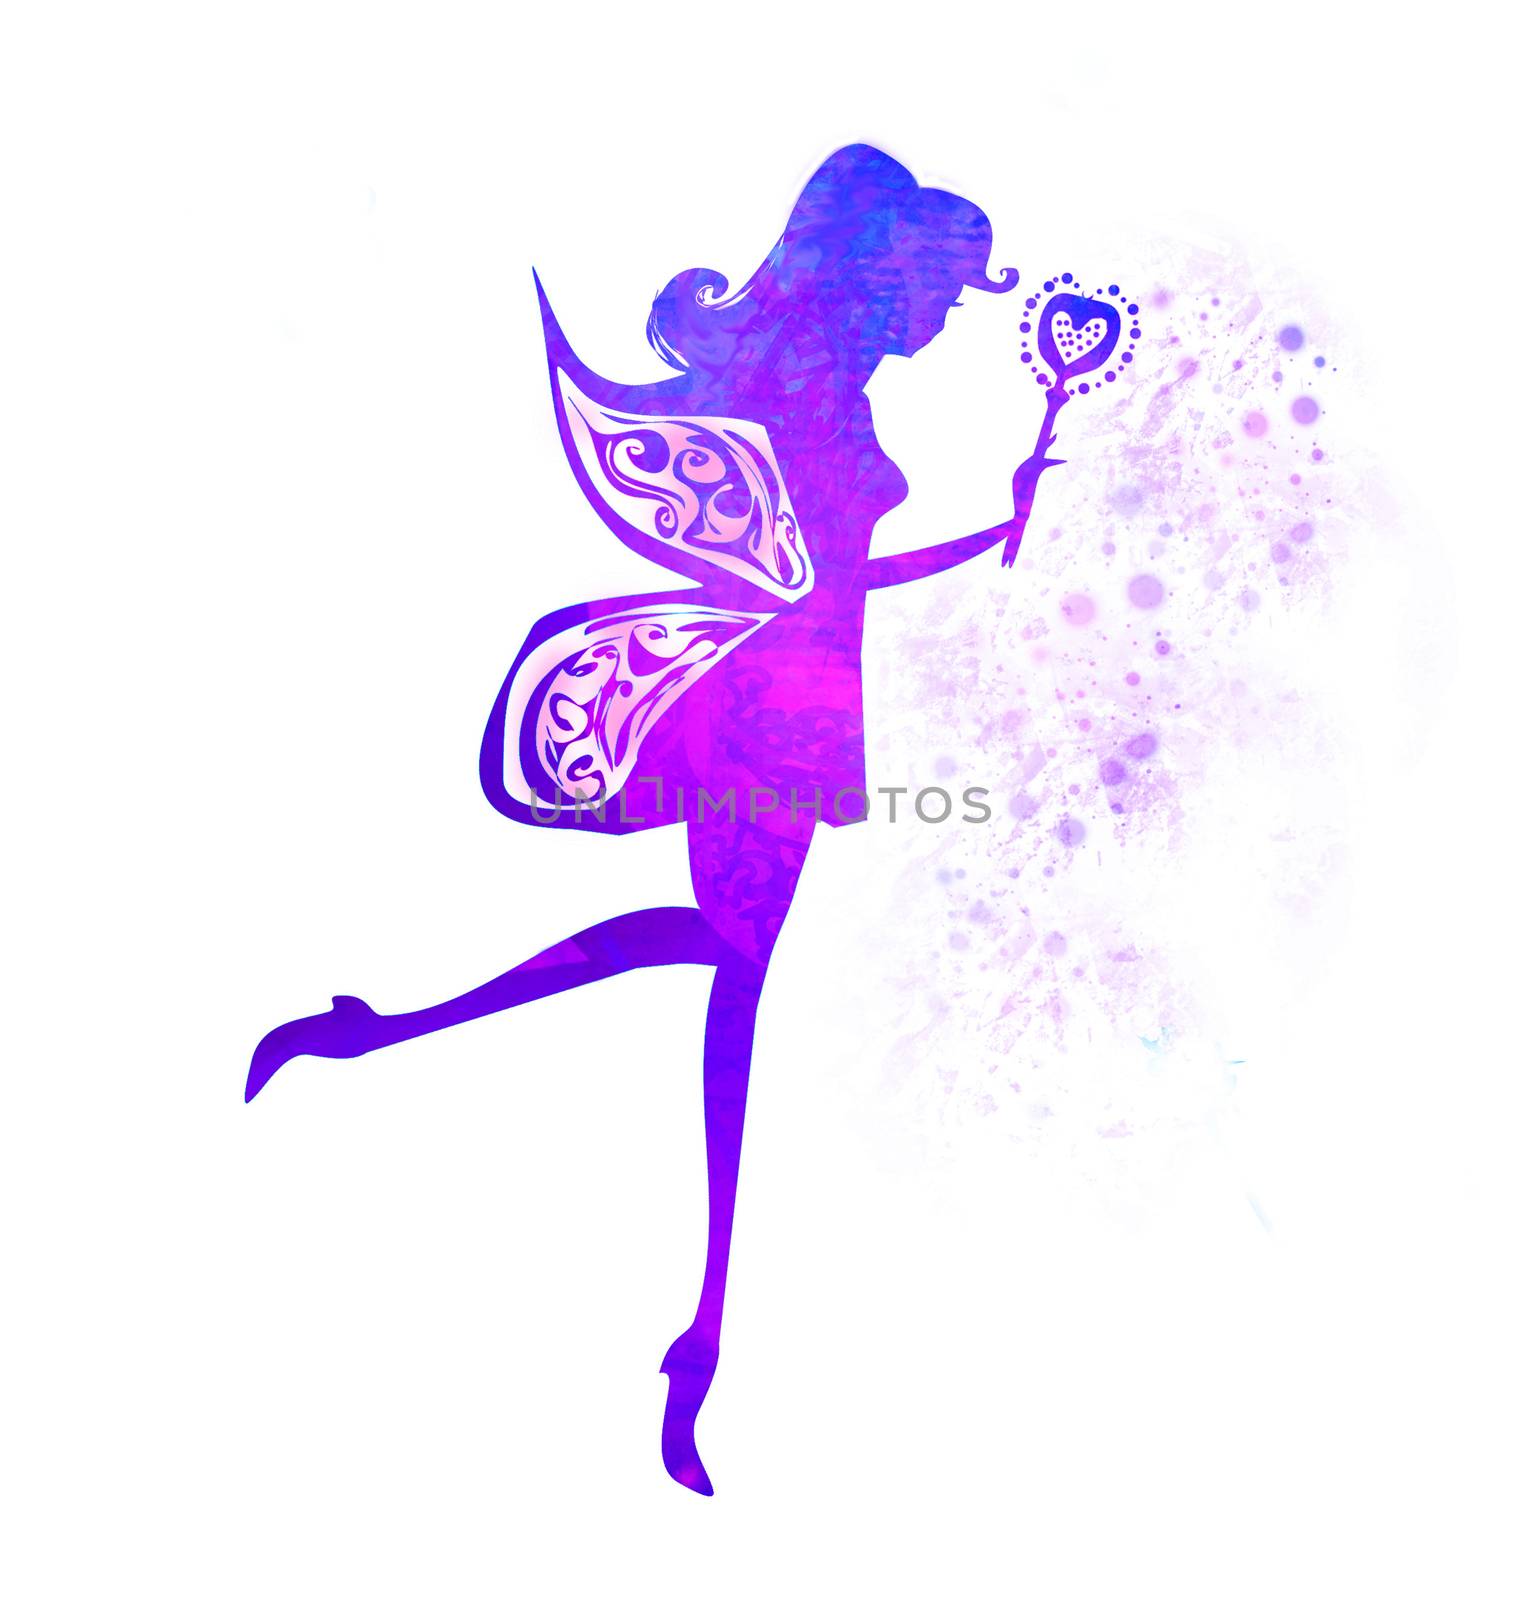 flying fairy with magic wand - isolated illustration, colorful silhouette